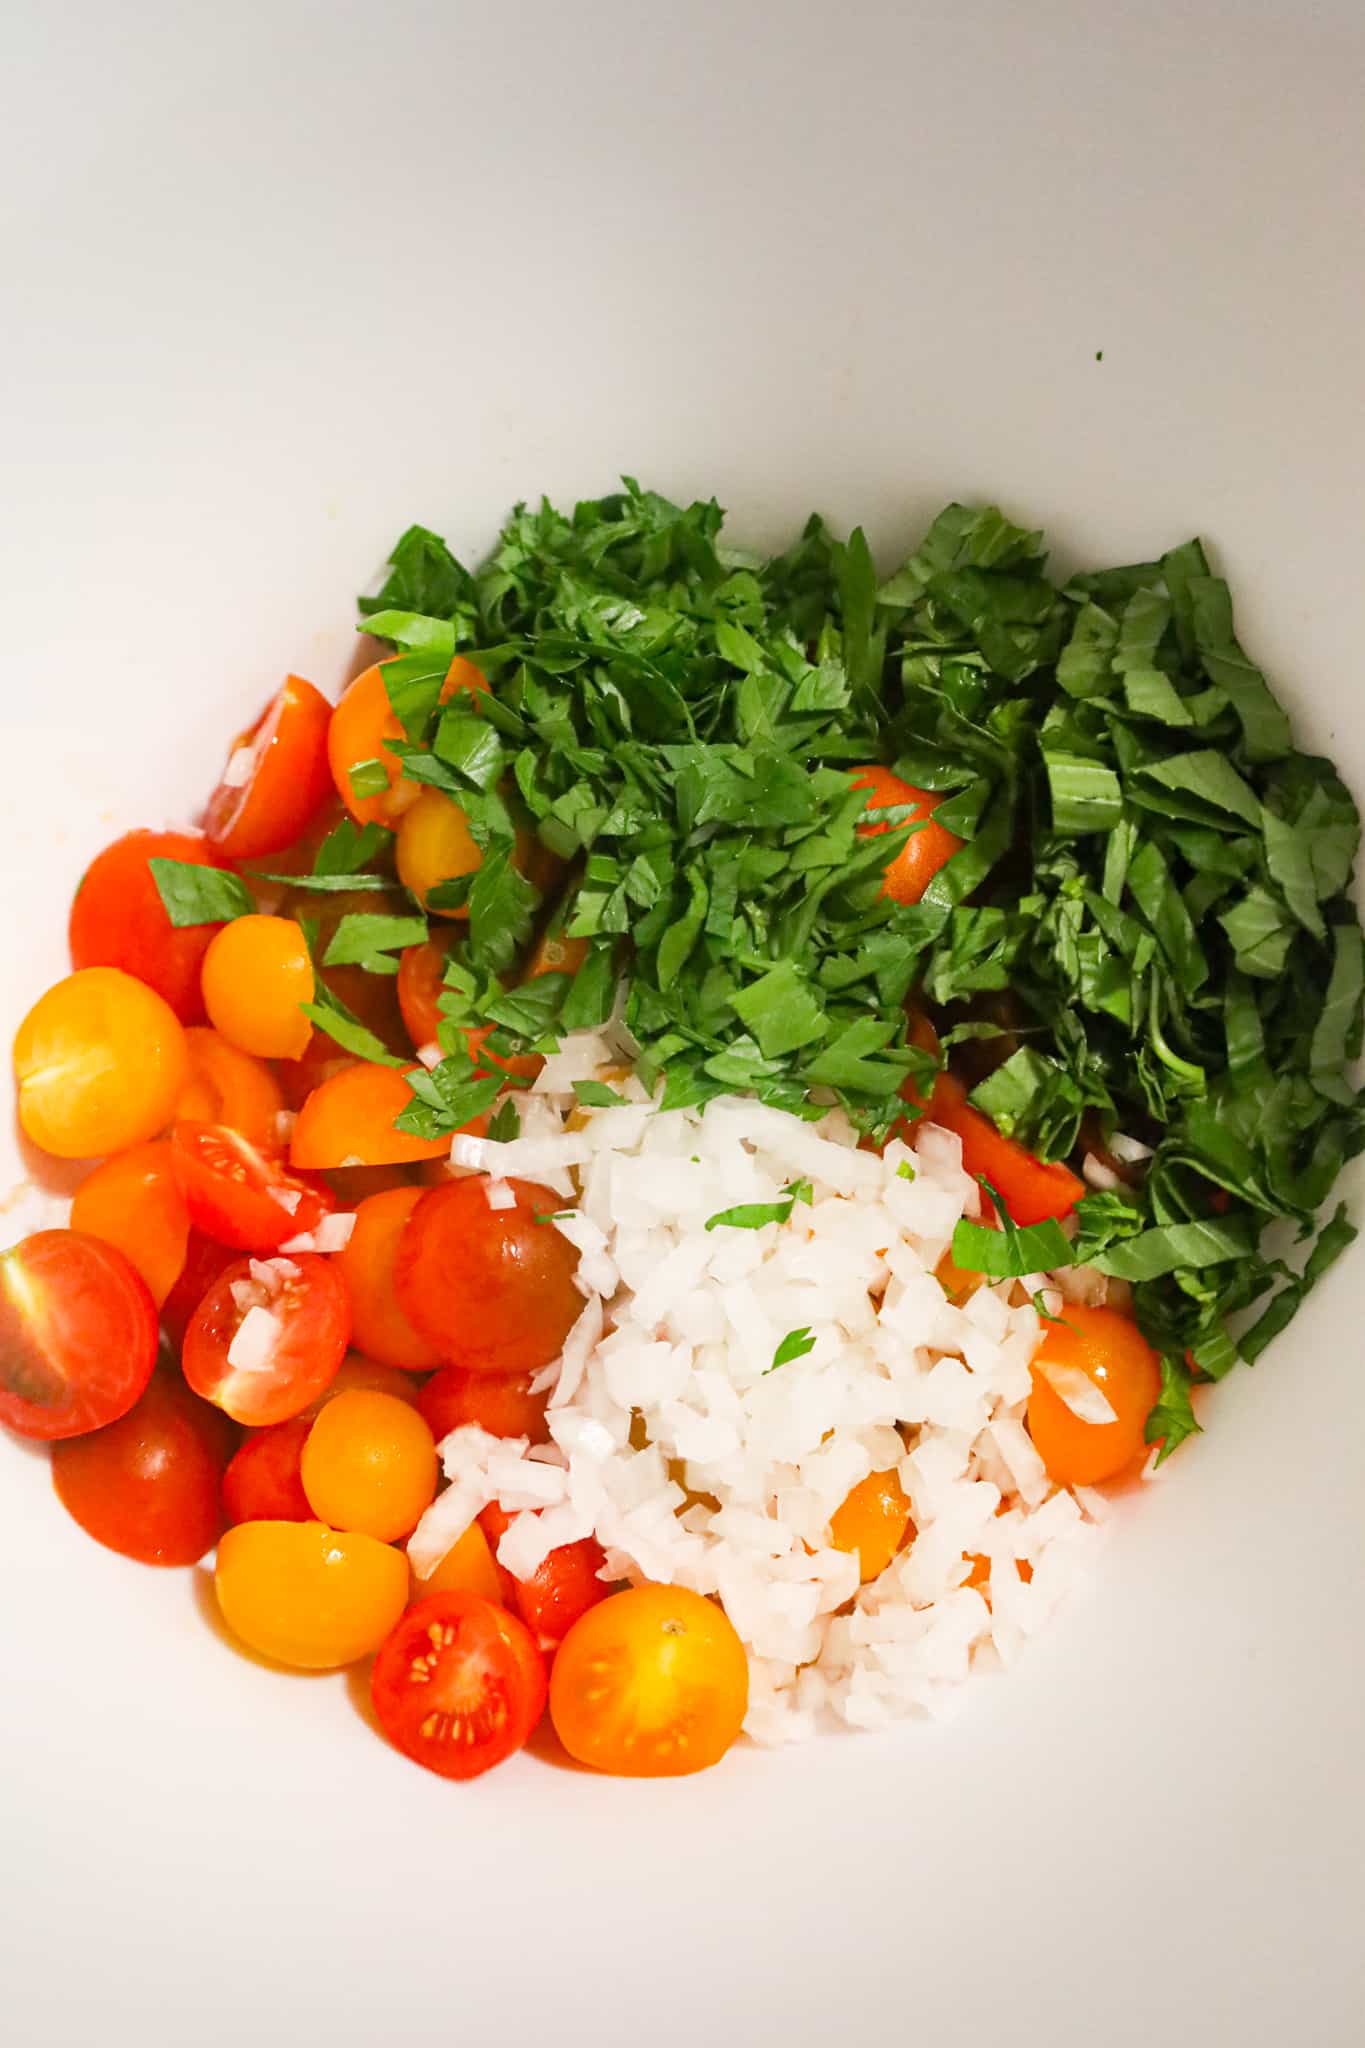 chopped herbs, diced onions and halved cherry tomatoes in a mixing bowl